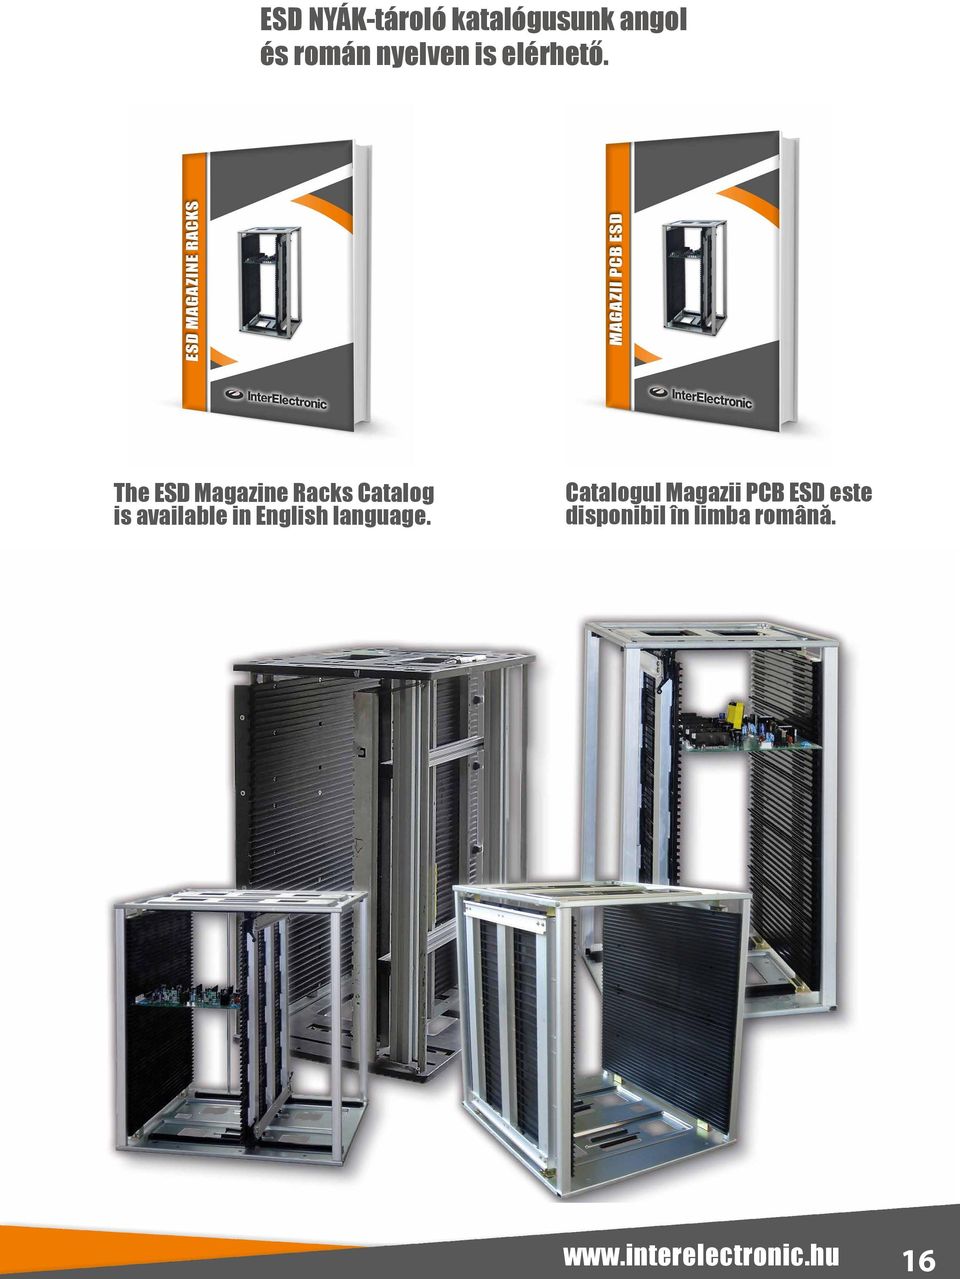 The ESD Magazine Racks Catalog is available in